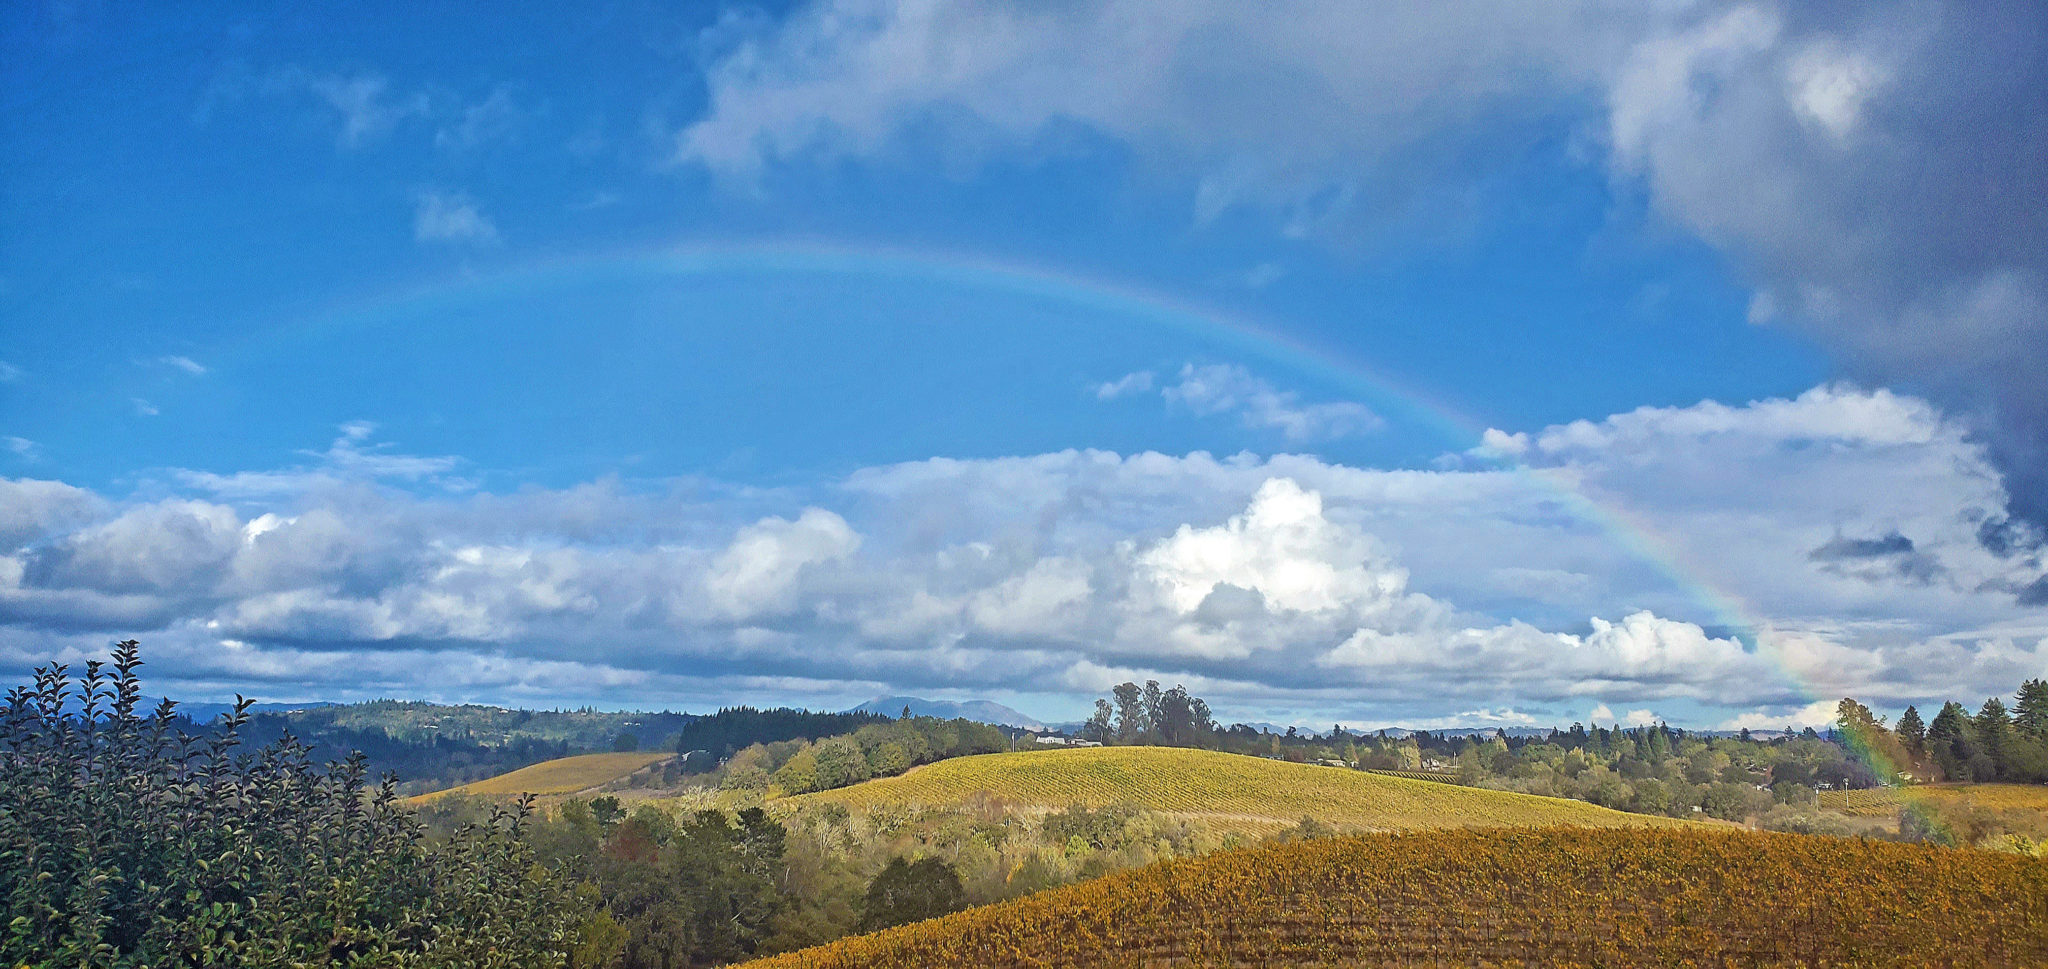 Vineyard with golden autumn colors under a rainbow on a clear, sunny day. 